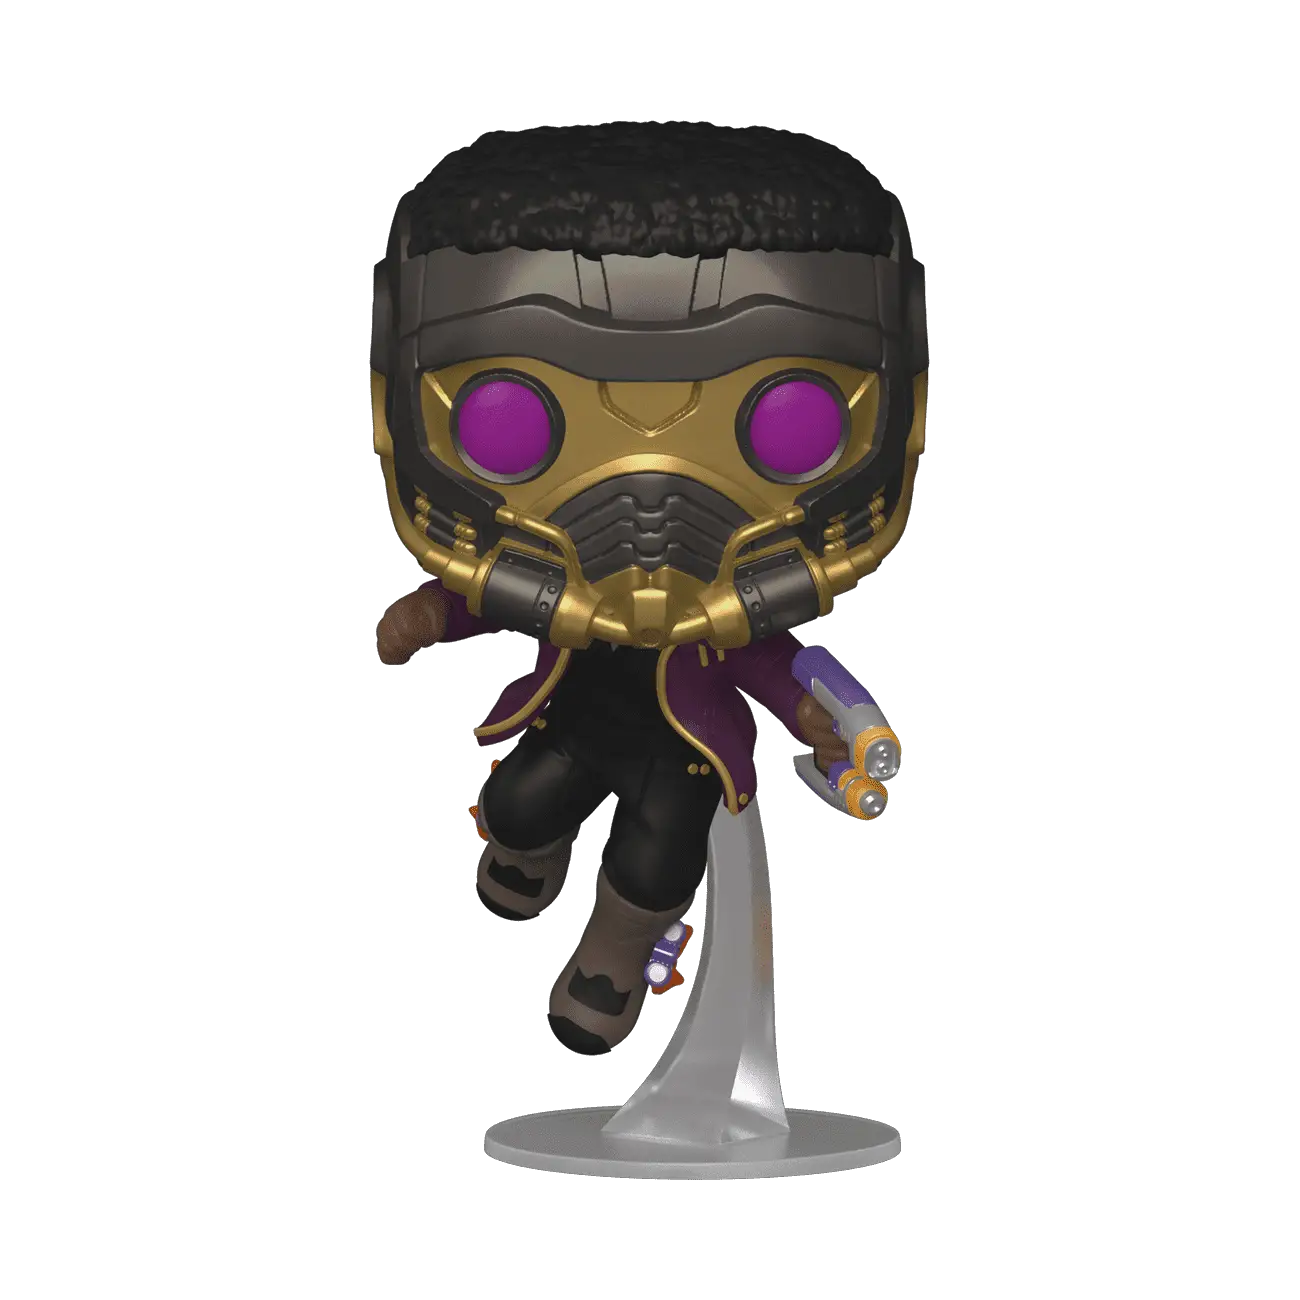 T'Challa Star-Lord Funko Pop - available exclusively at BoxLunch What If…?